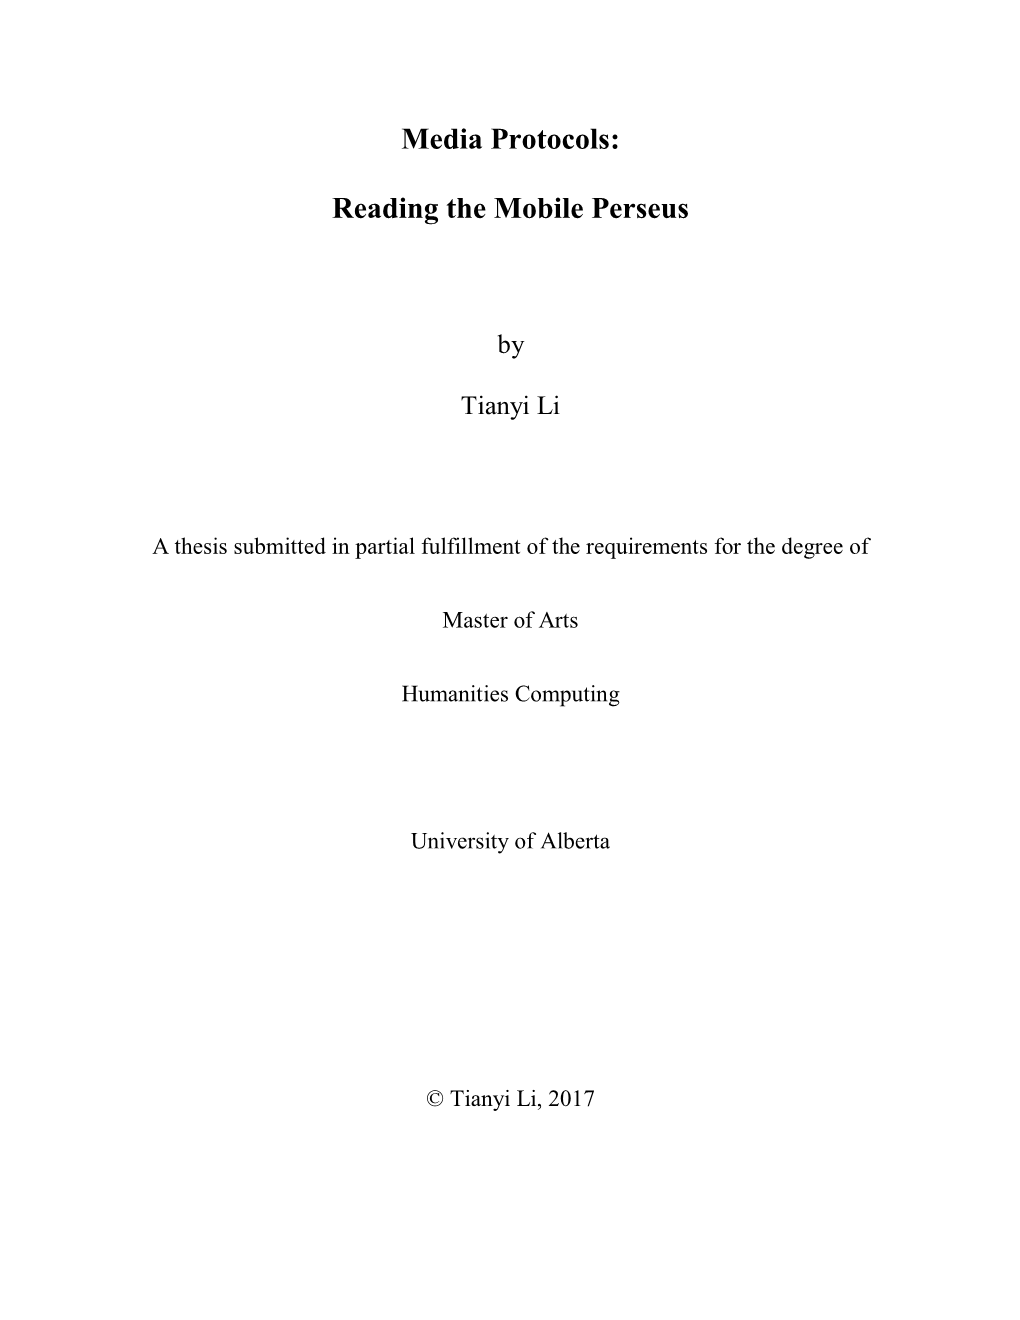 Reading the Mobile Perseus